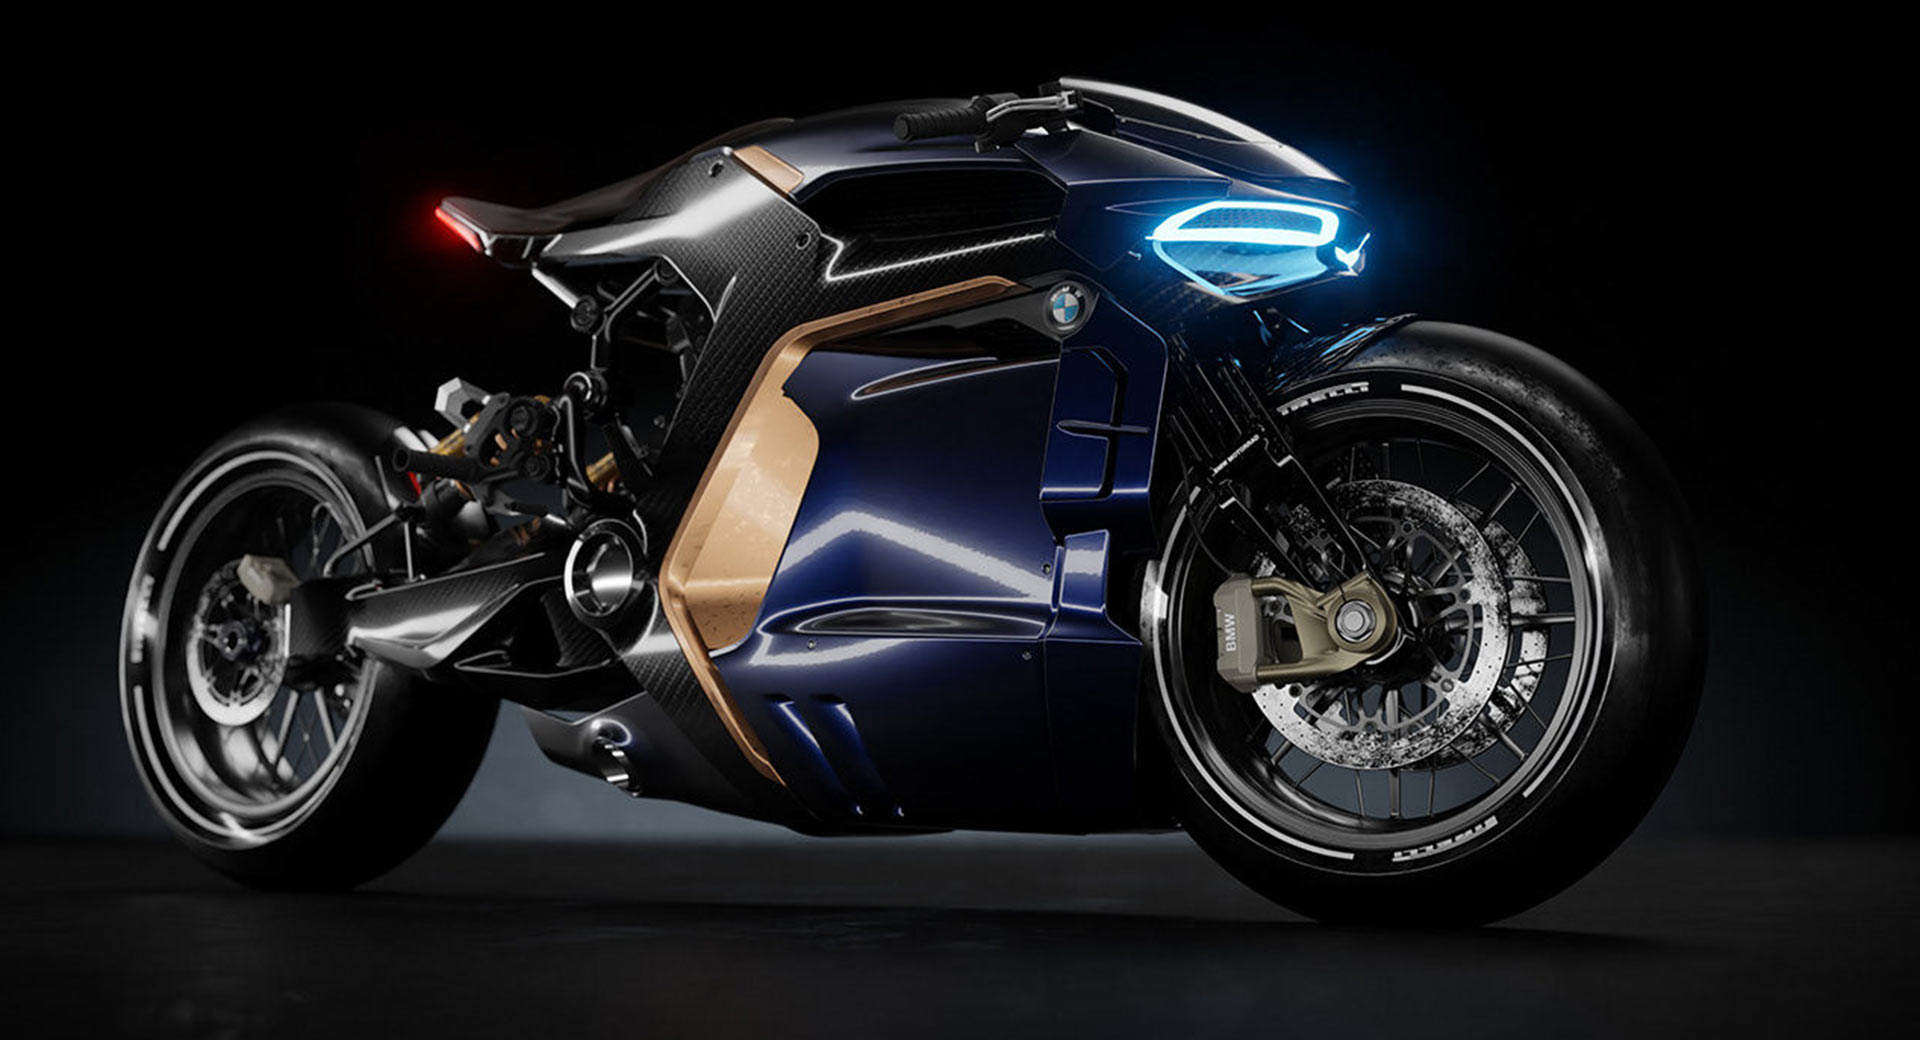 Bmw Motorcycles Images - BMW Motorcycles Pictures and Wallpapers - The